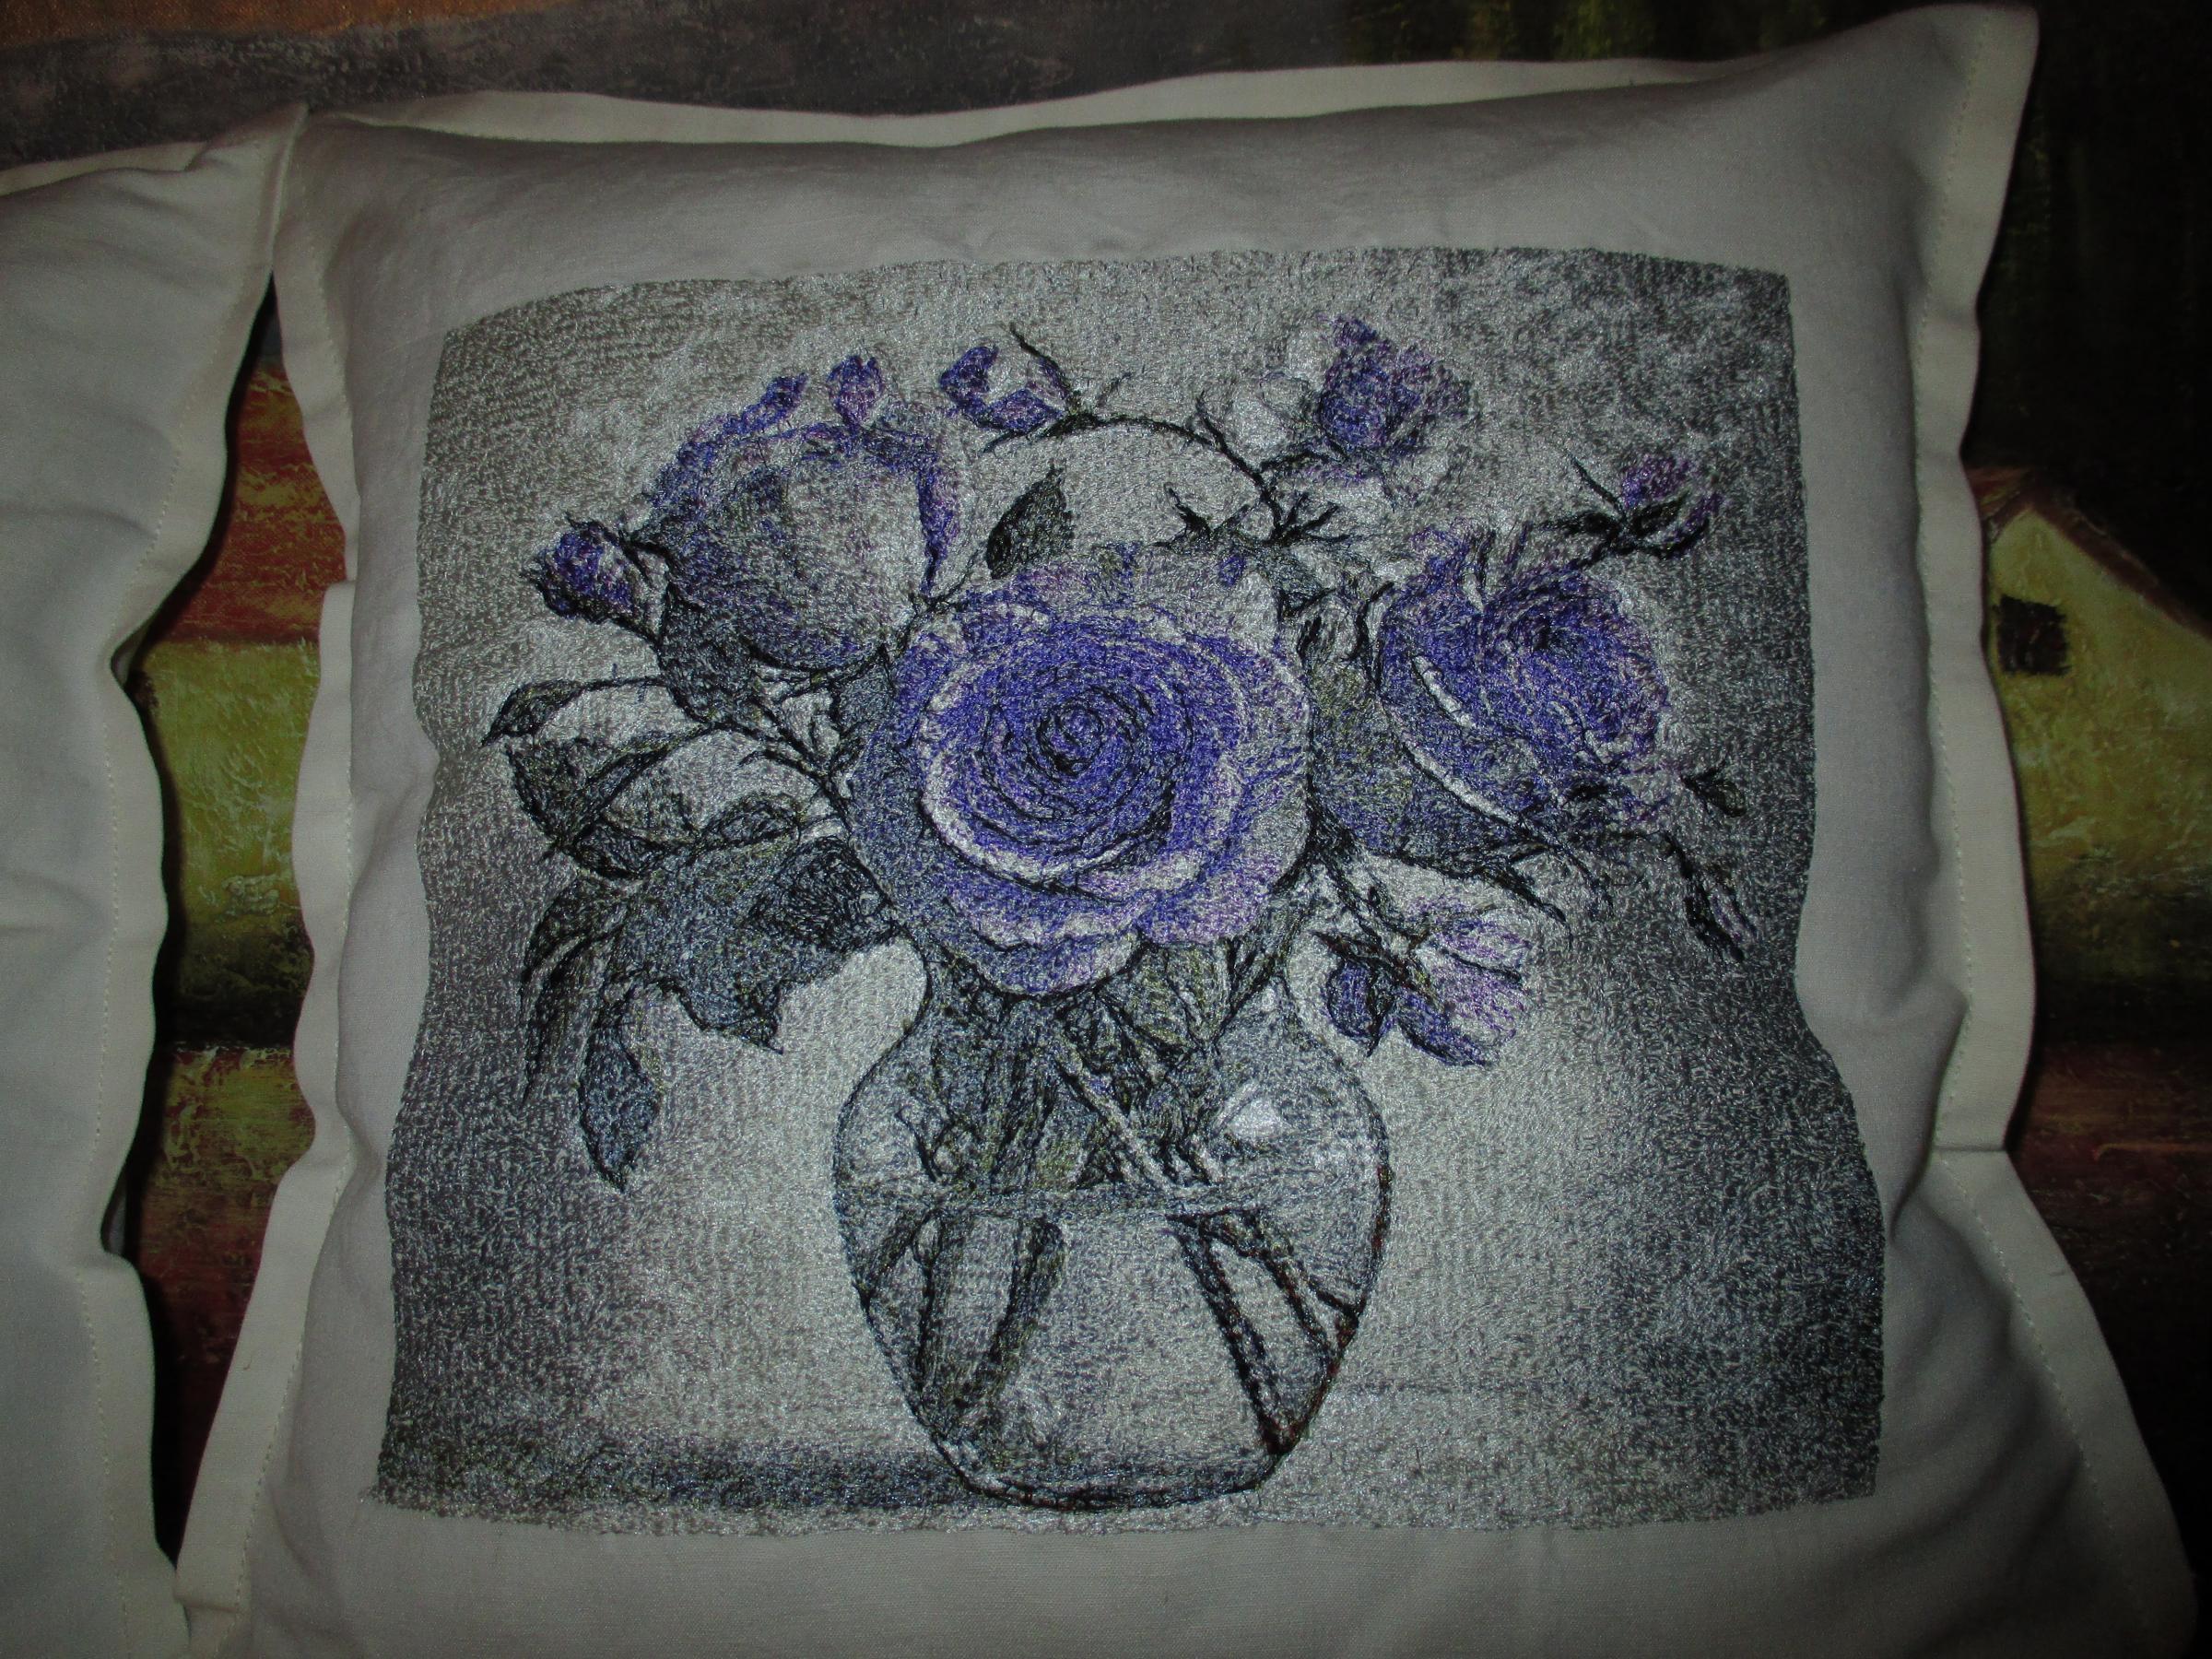 Embroidered cushion with Three roses in vase design